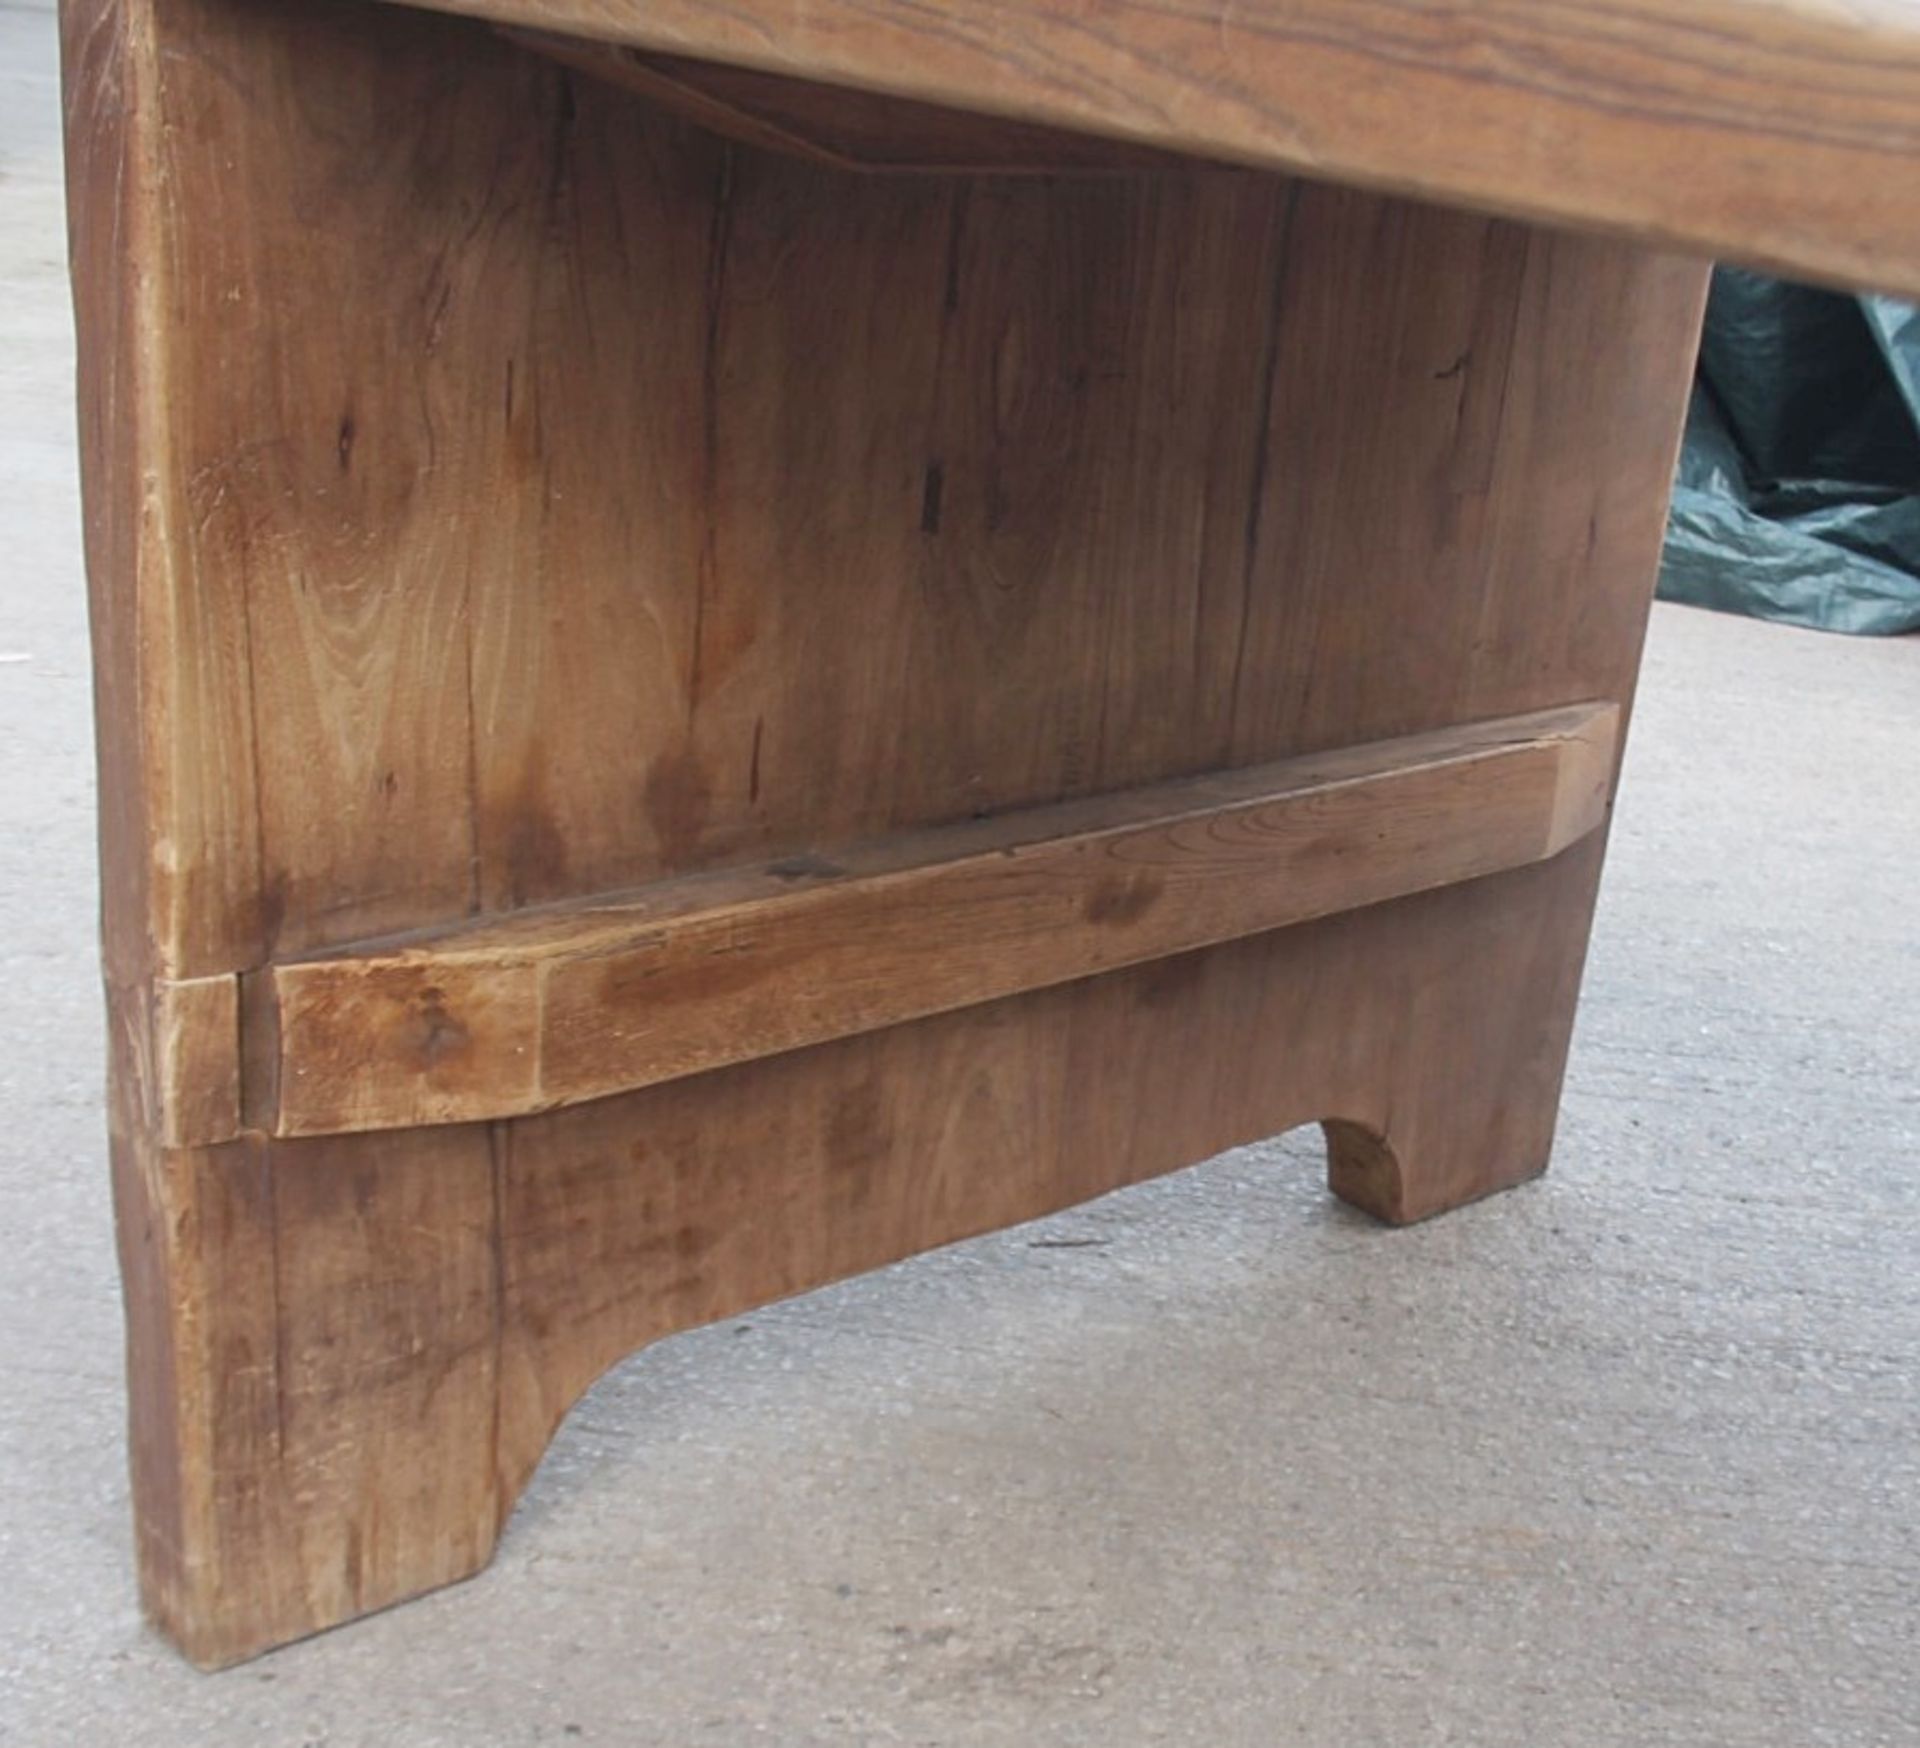 1 x Large 2-Metre Timber Desk - Recently Relocated From An Exclusive Property - Ref: GEN1143 - - Image 4 of 7